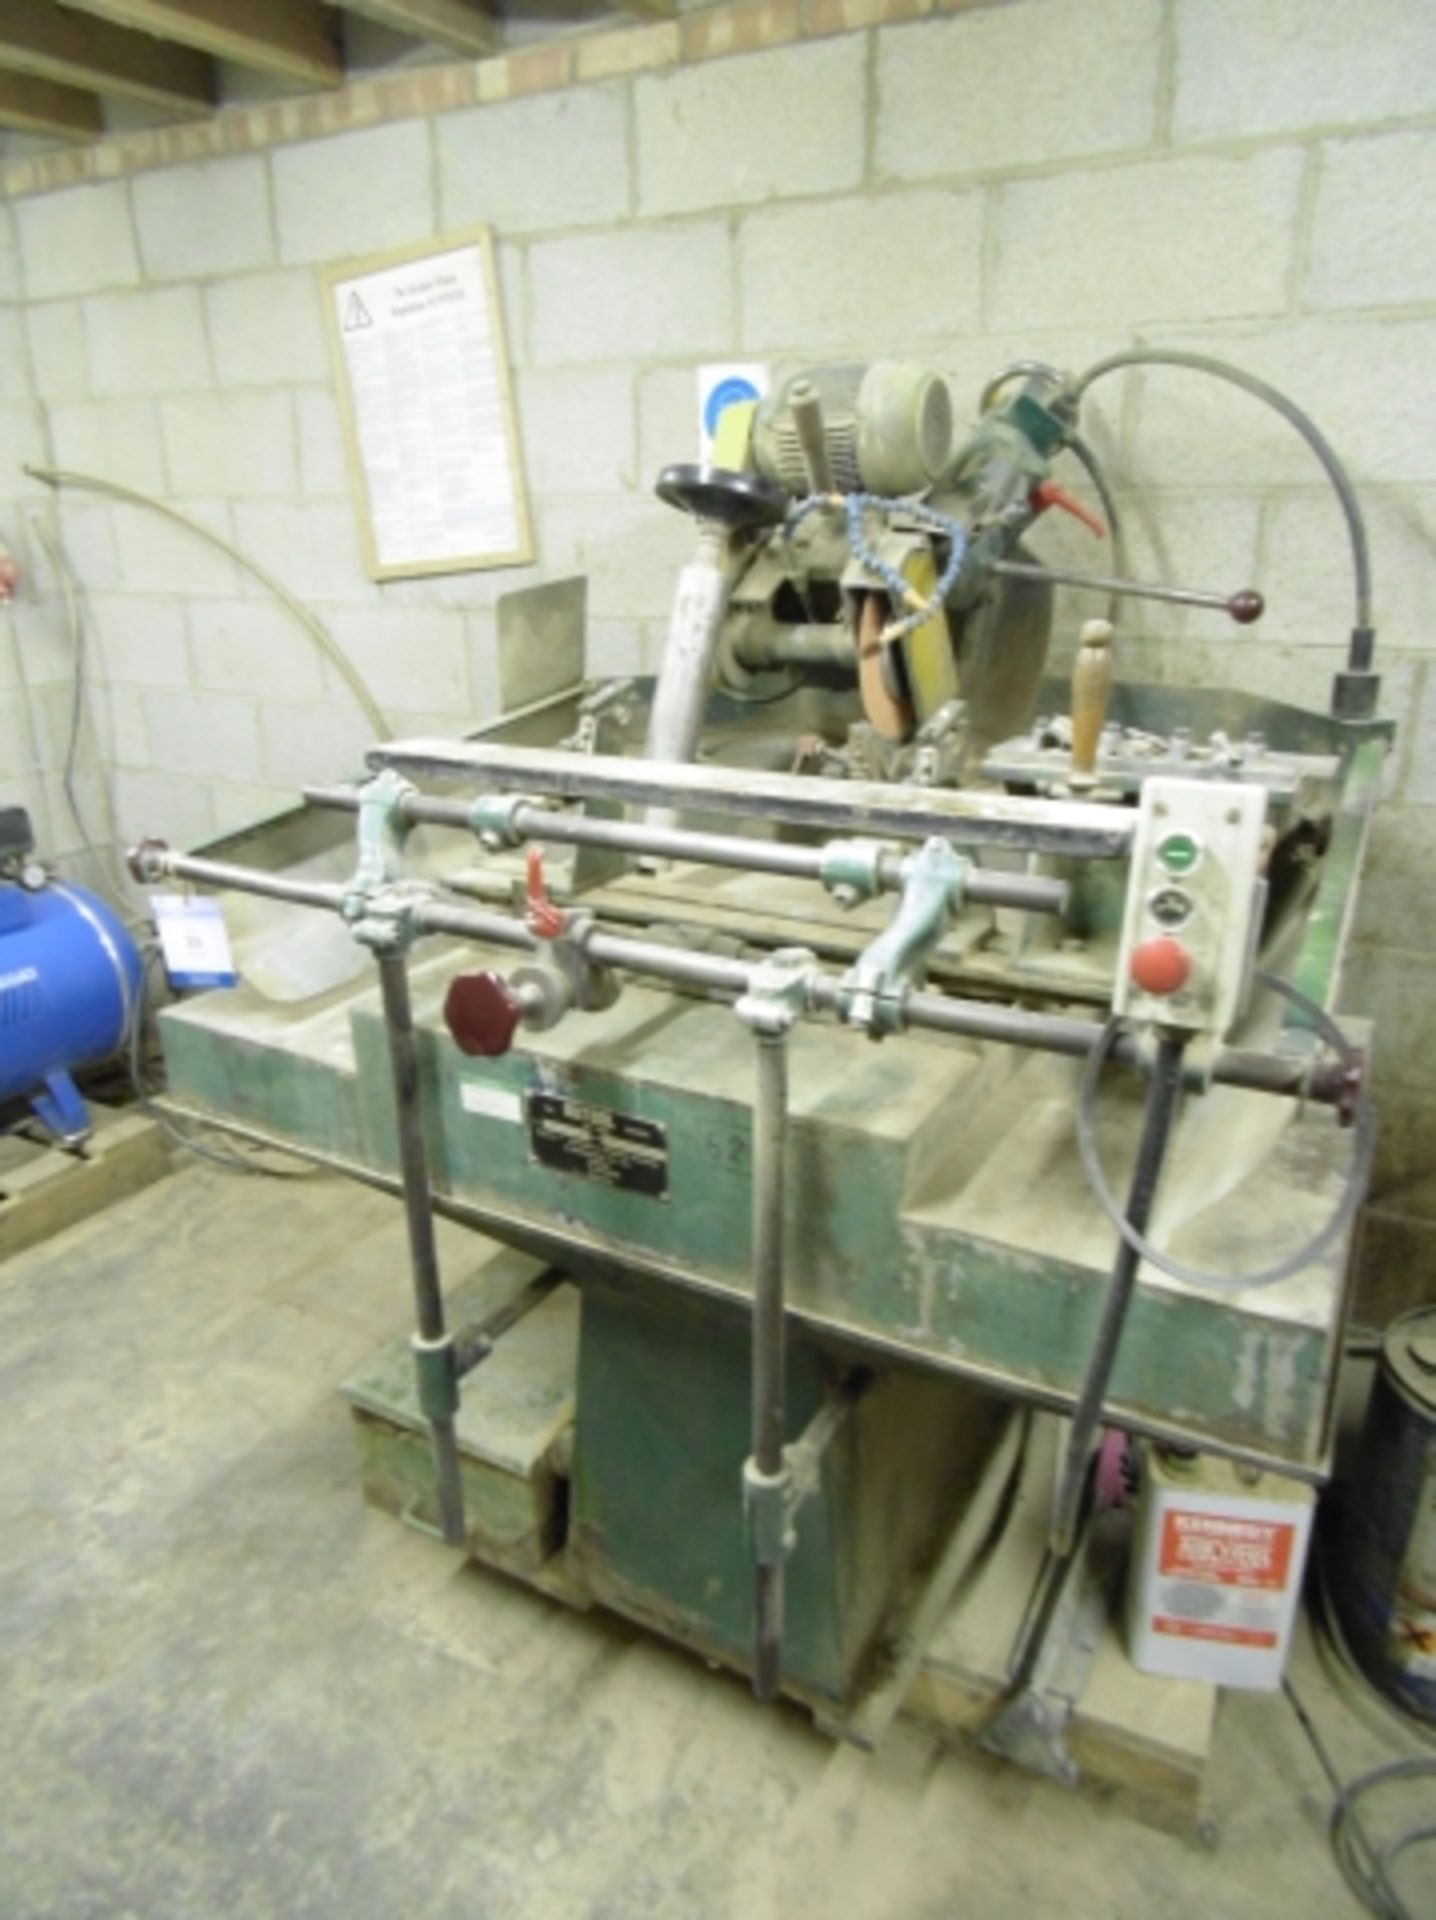 * Autool Automatic Tool Grinder; 3 phase; serial number 6414/PR3NX. Please note there is a £20 - Image 2 of 3